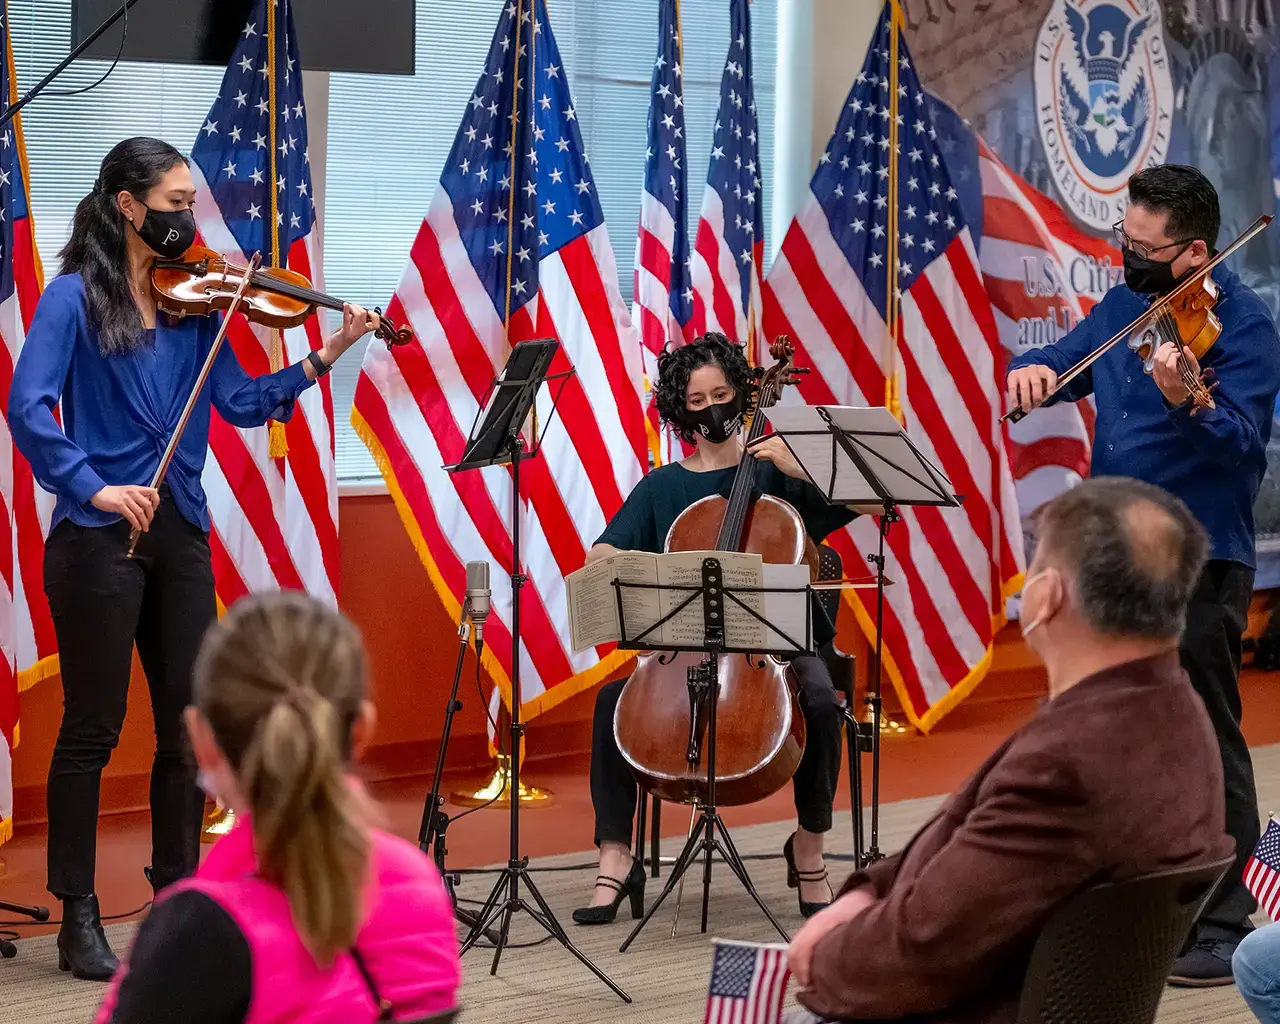 Philadelphia Orchestra musicians Julia Li (violin), Che-Hung Chen (viola), and Yumi Kendall (assistant principal cello) perform during a naturalization ceremony in West Philadelphia, part of the Orchestra's free concert series Our City, Your Orchestra, 2021. Photo by Jeff Fusco.